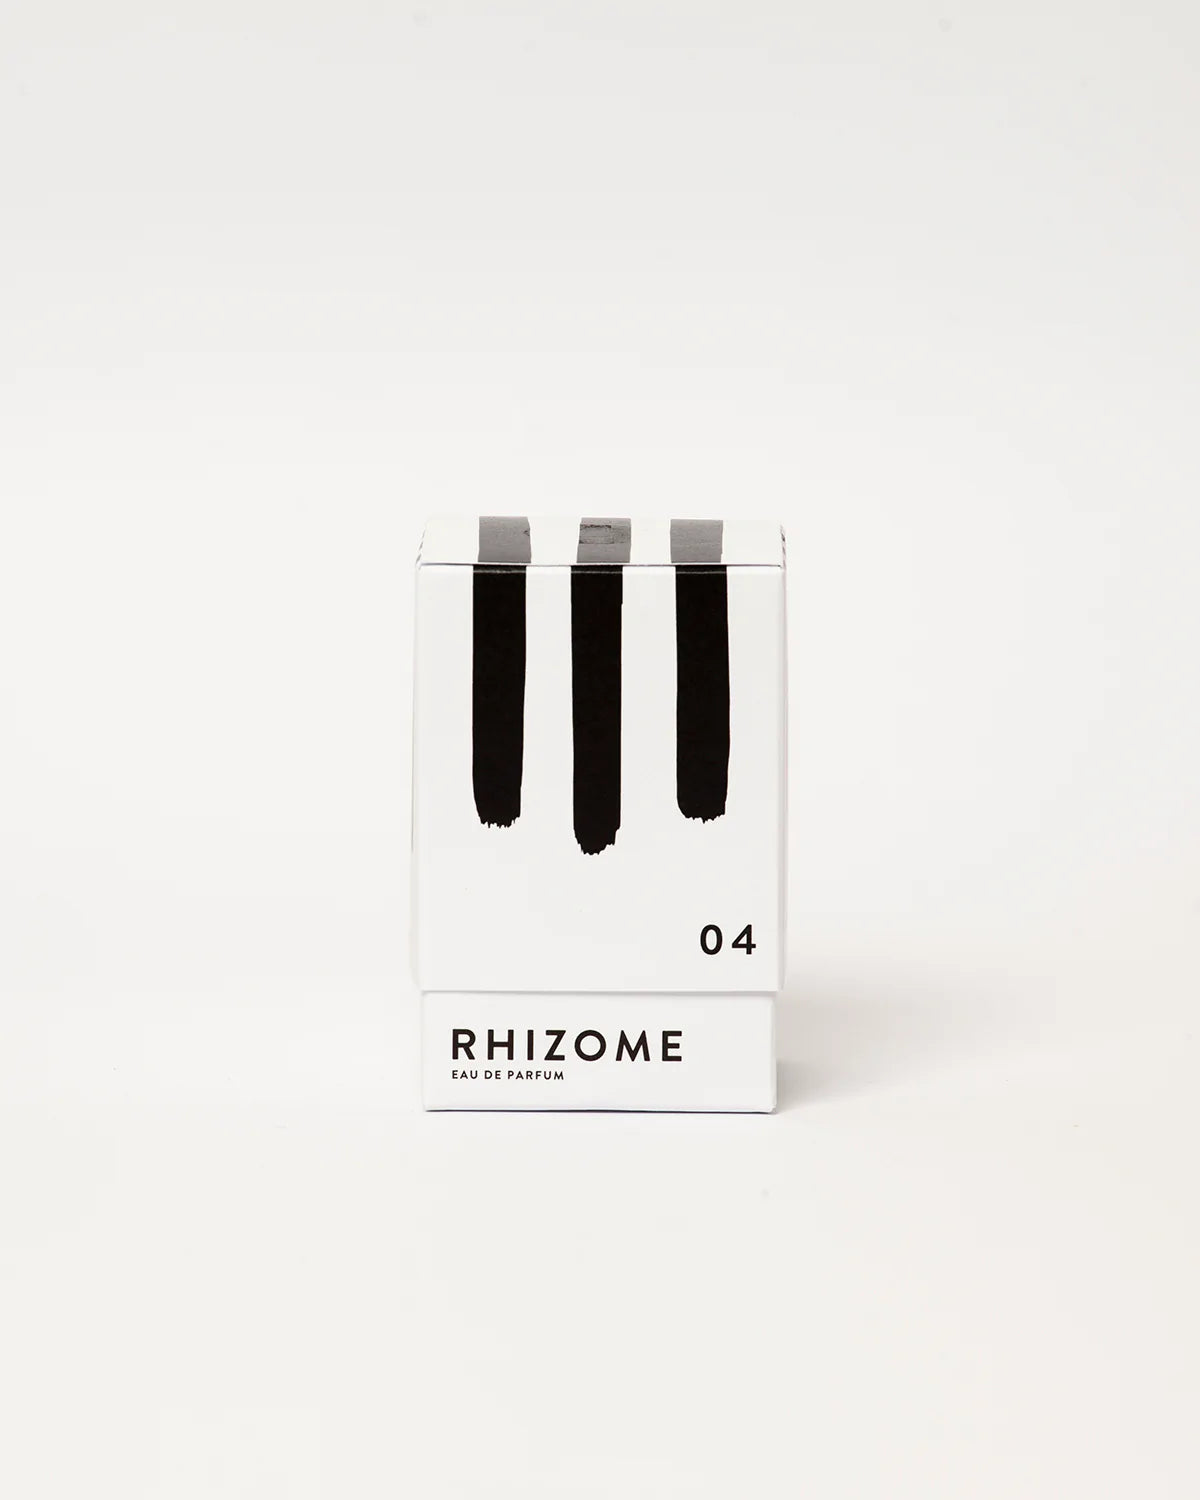 RHIZOME 04 is an eclectic mix of inspiration and different scenarios.